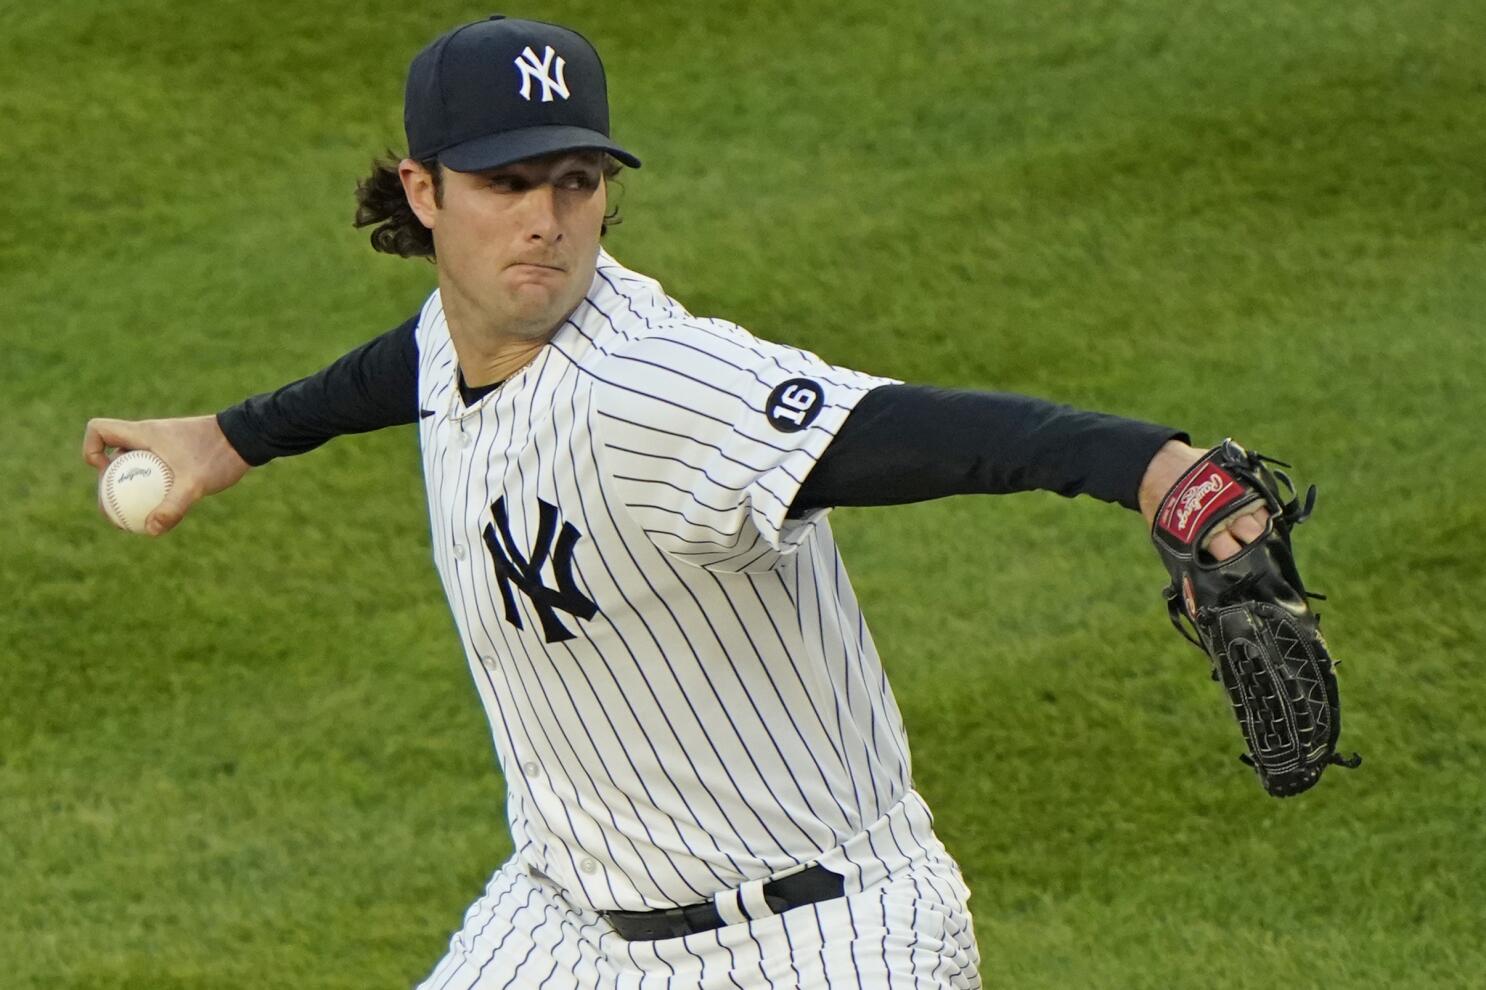 Here's how to buy Gerrit Cole's New York Yankees jersey 